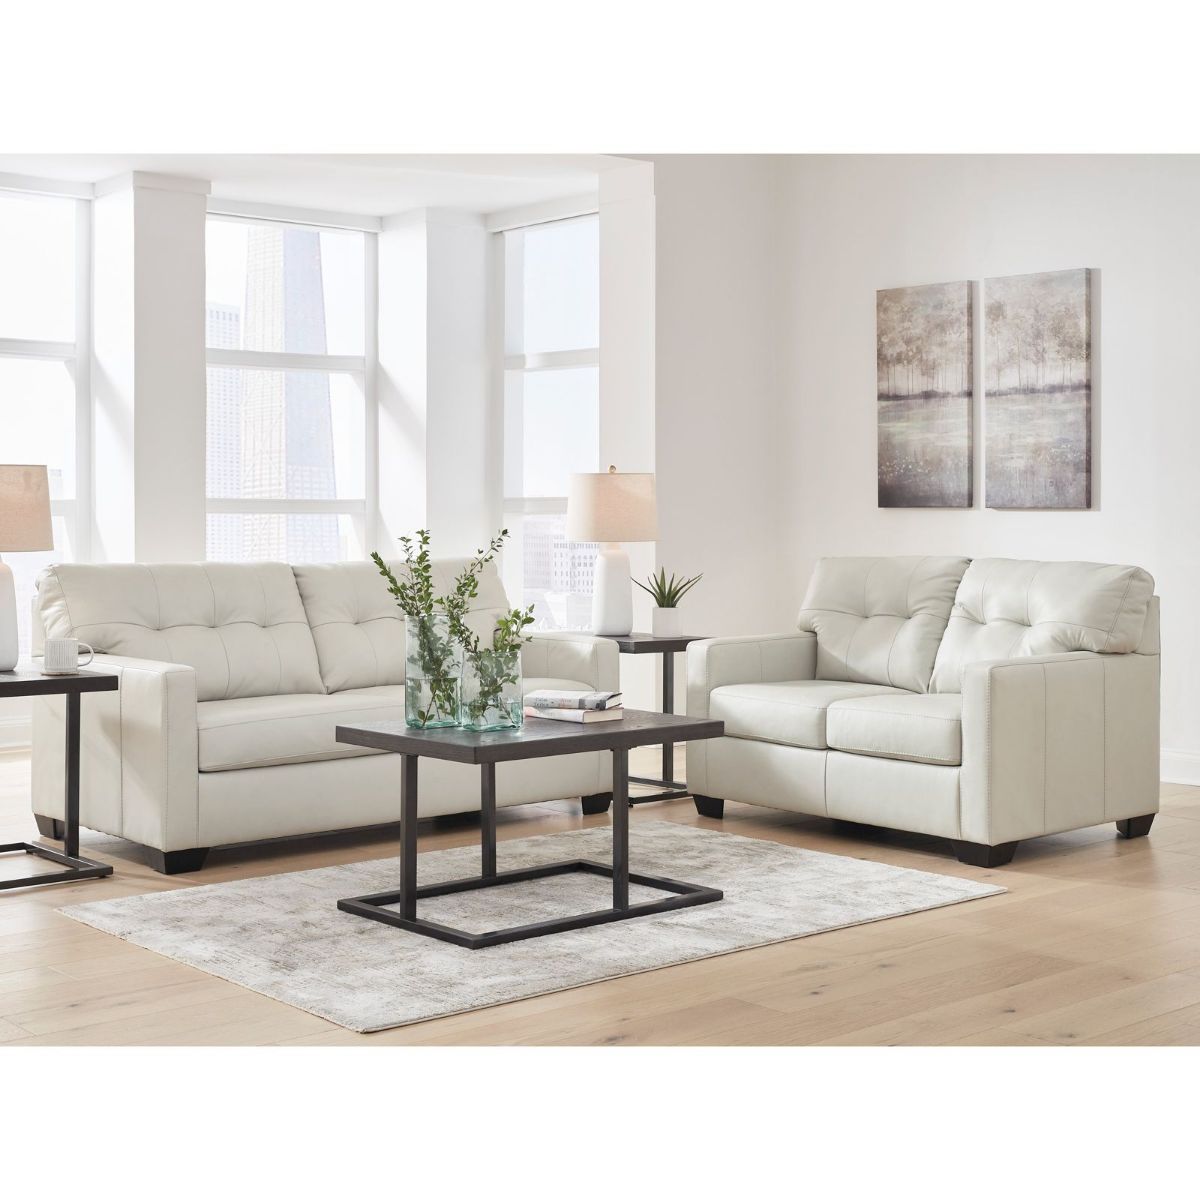 Picture of Belziani Coconut Leather Loveseat